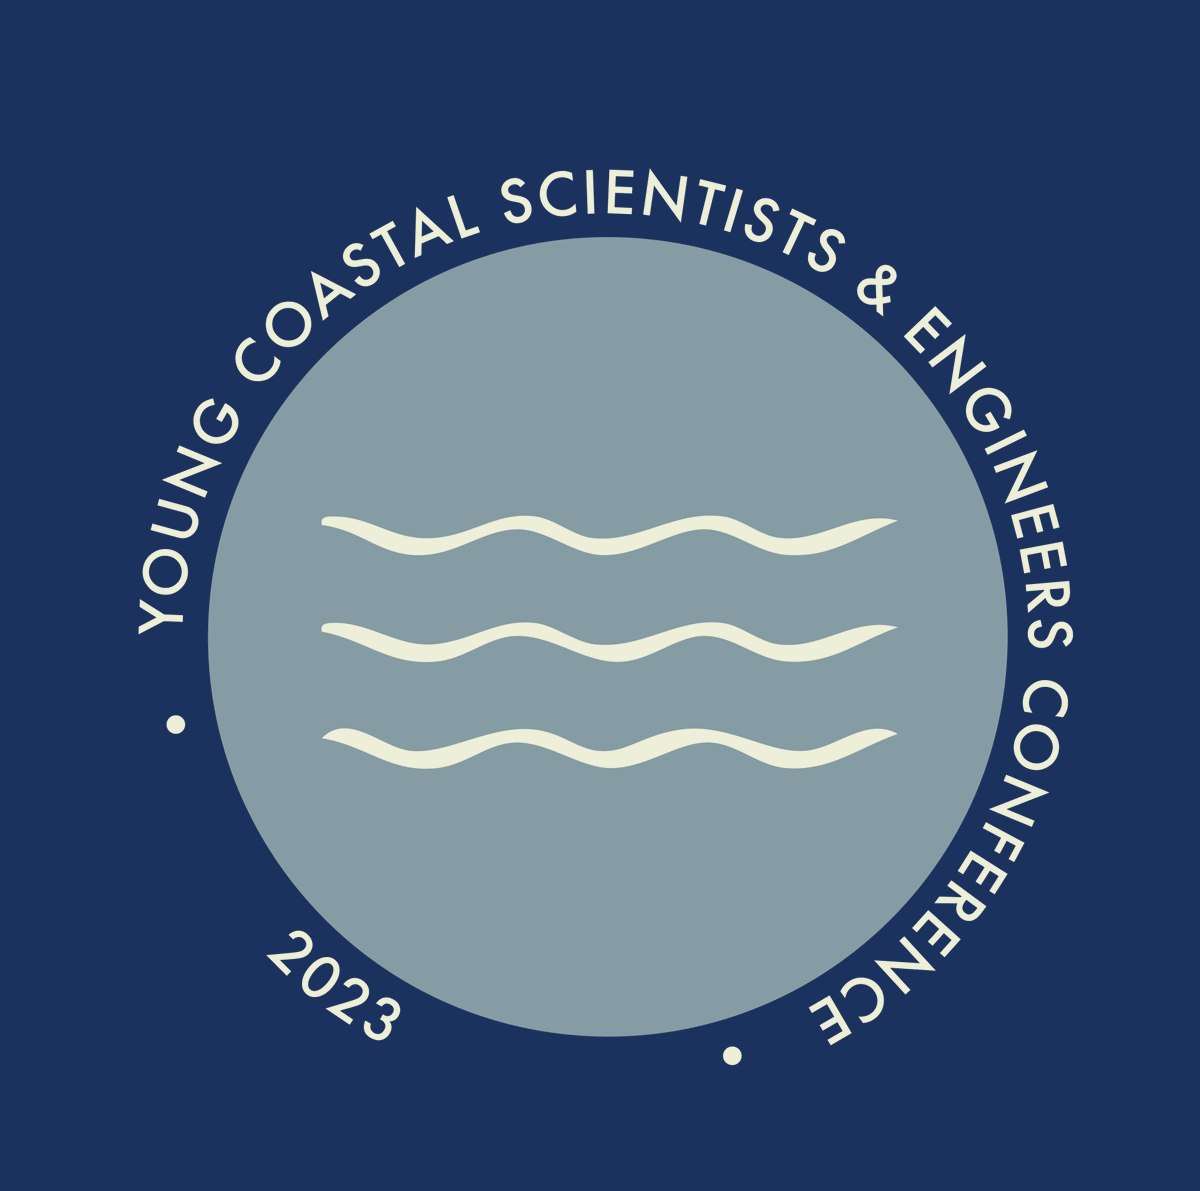 CALL FOR ABSTRACTS for AusYCSEC23 is LIVE! 

Check out our website for more information: ausycsec.com.au/call-for-abstr…

We are excited to hear about all the fantastic research being done throughout the community!

#research  #engineering #science  #coastal #marine #AusYCSEC23 #AusYCSEC